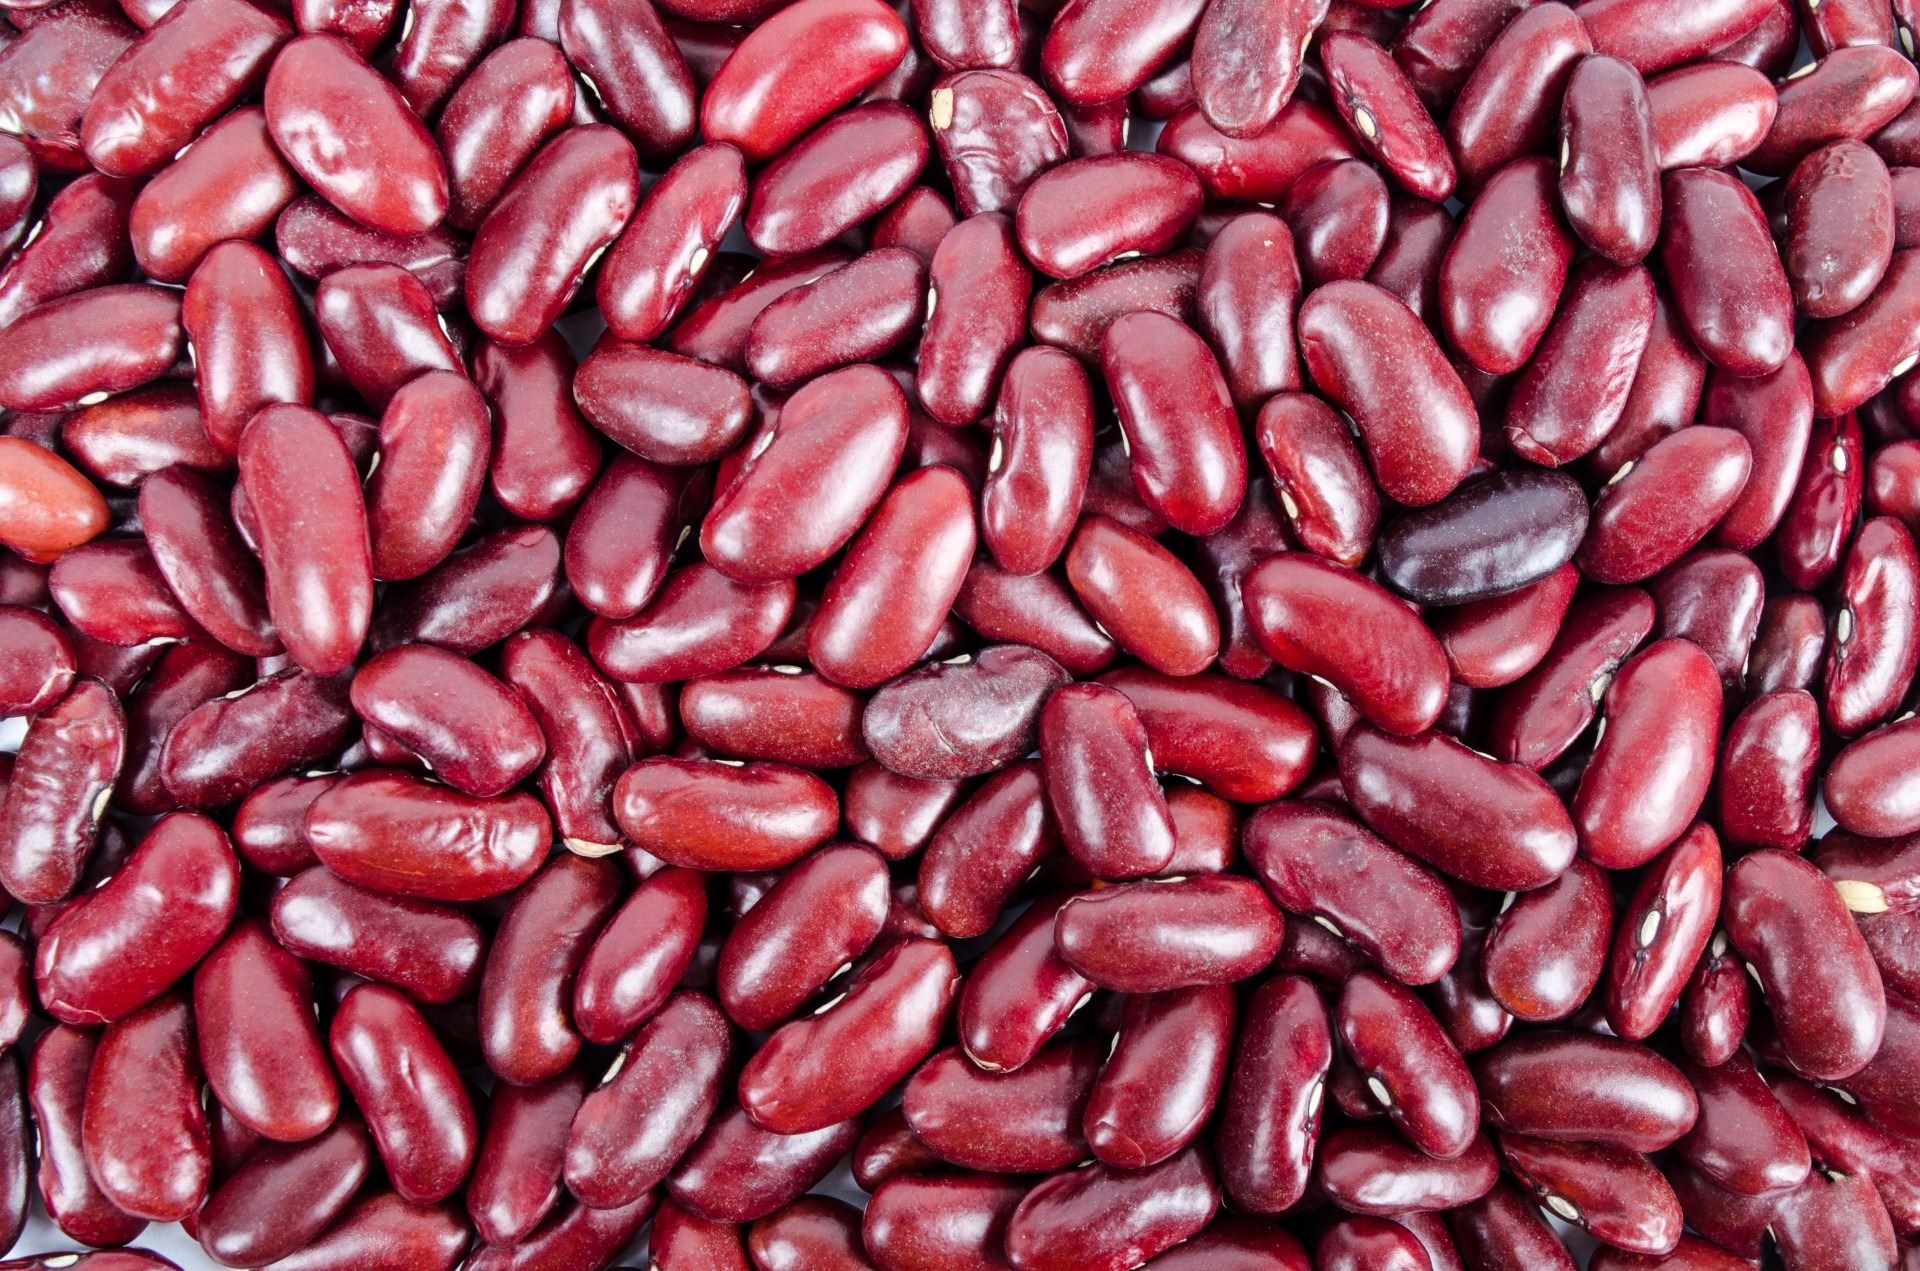 Read more about the article Know your beans